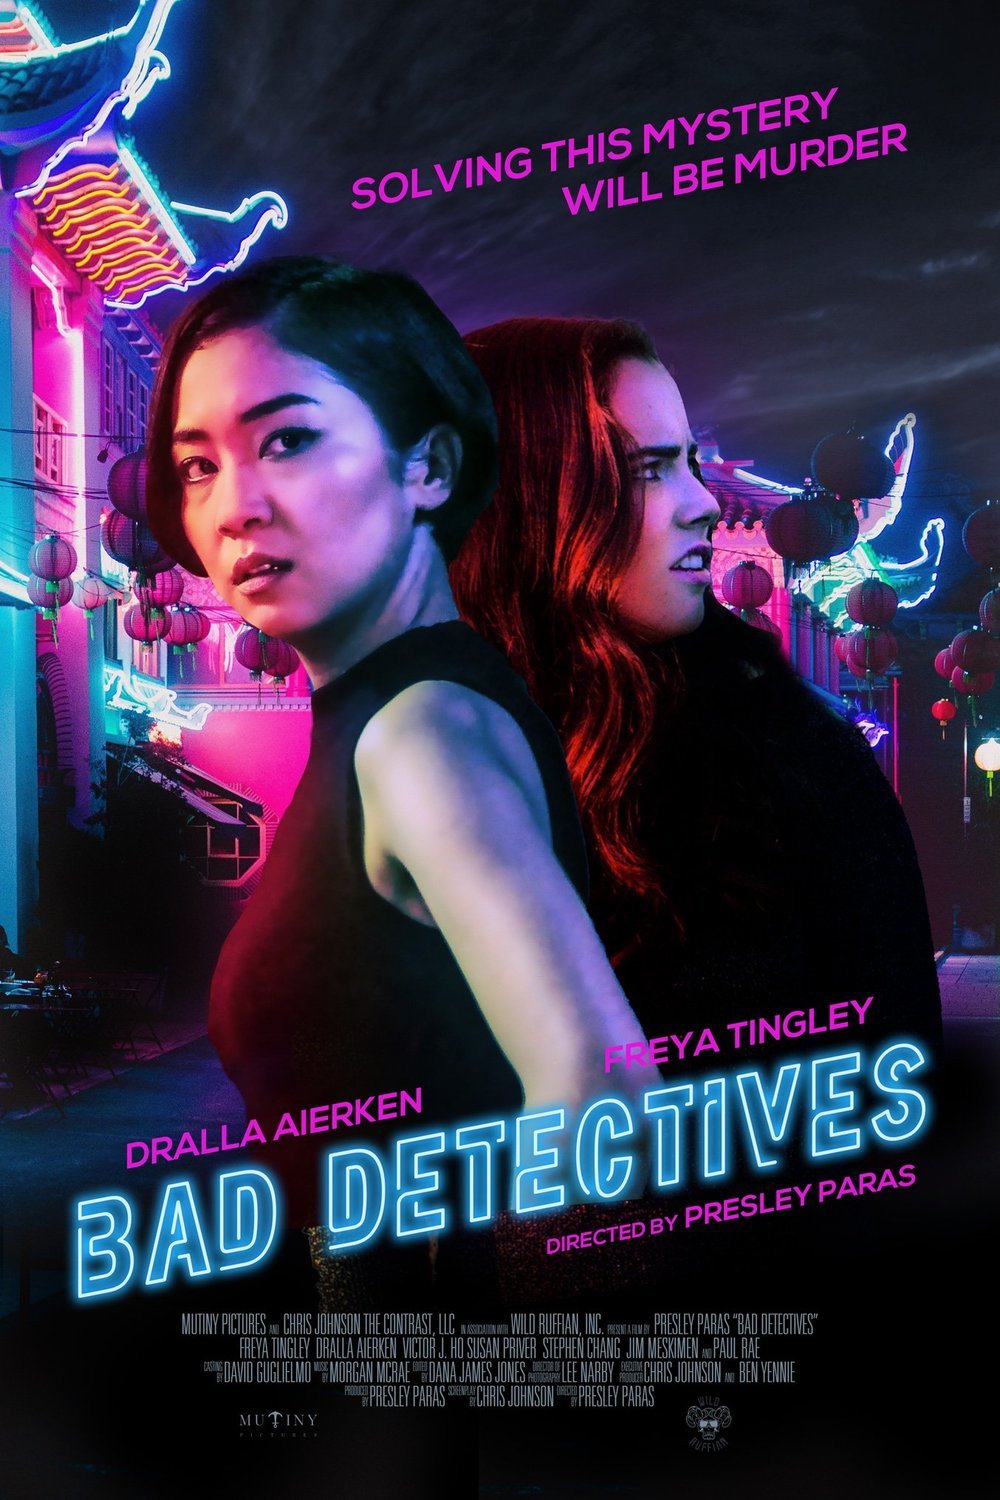 Poster of the movie Year of the Detectives